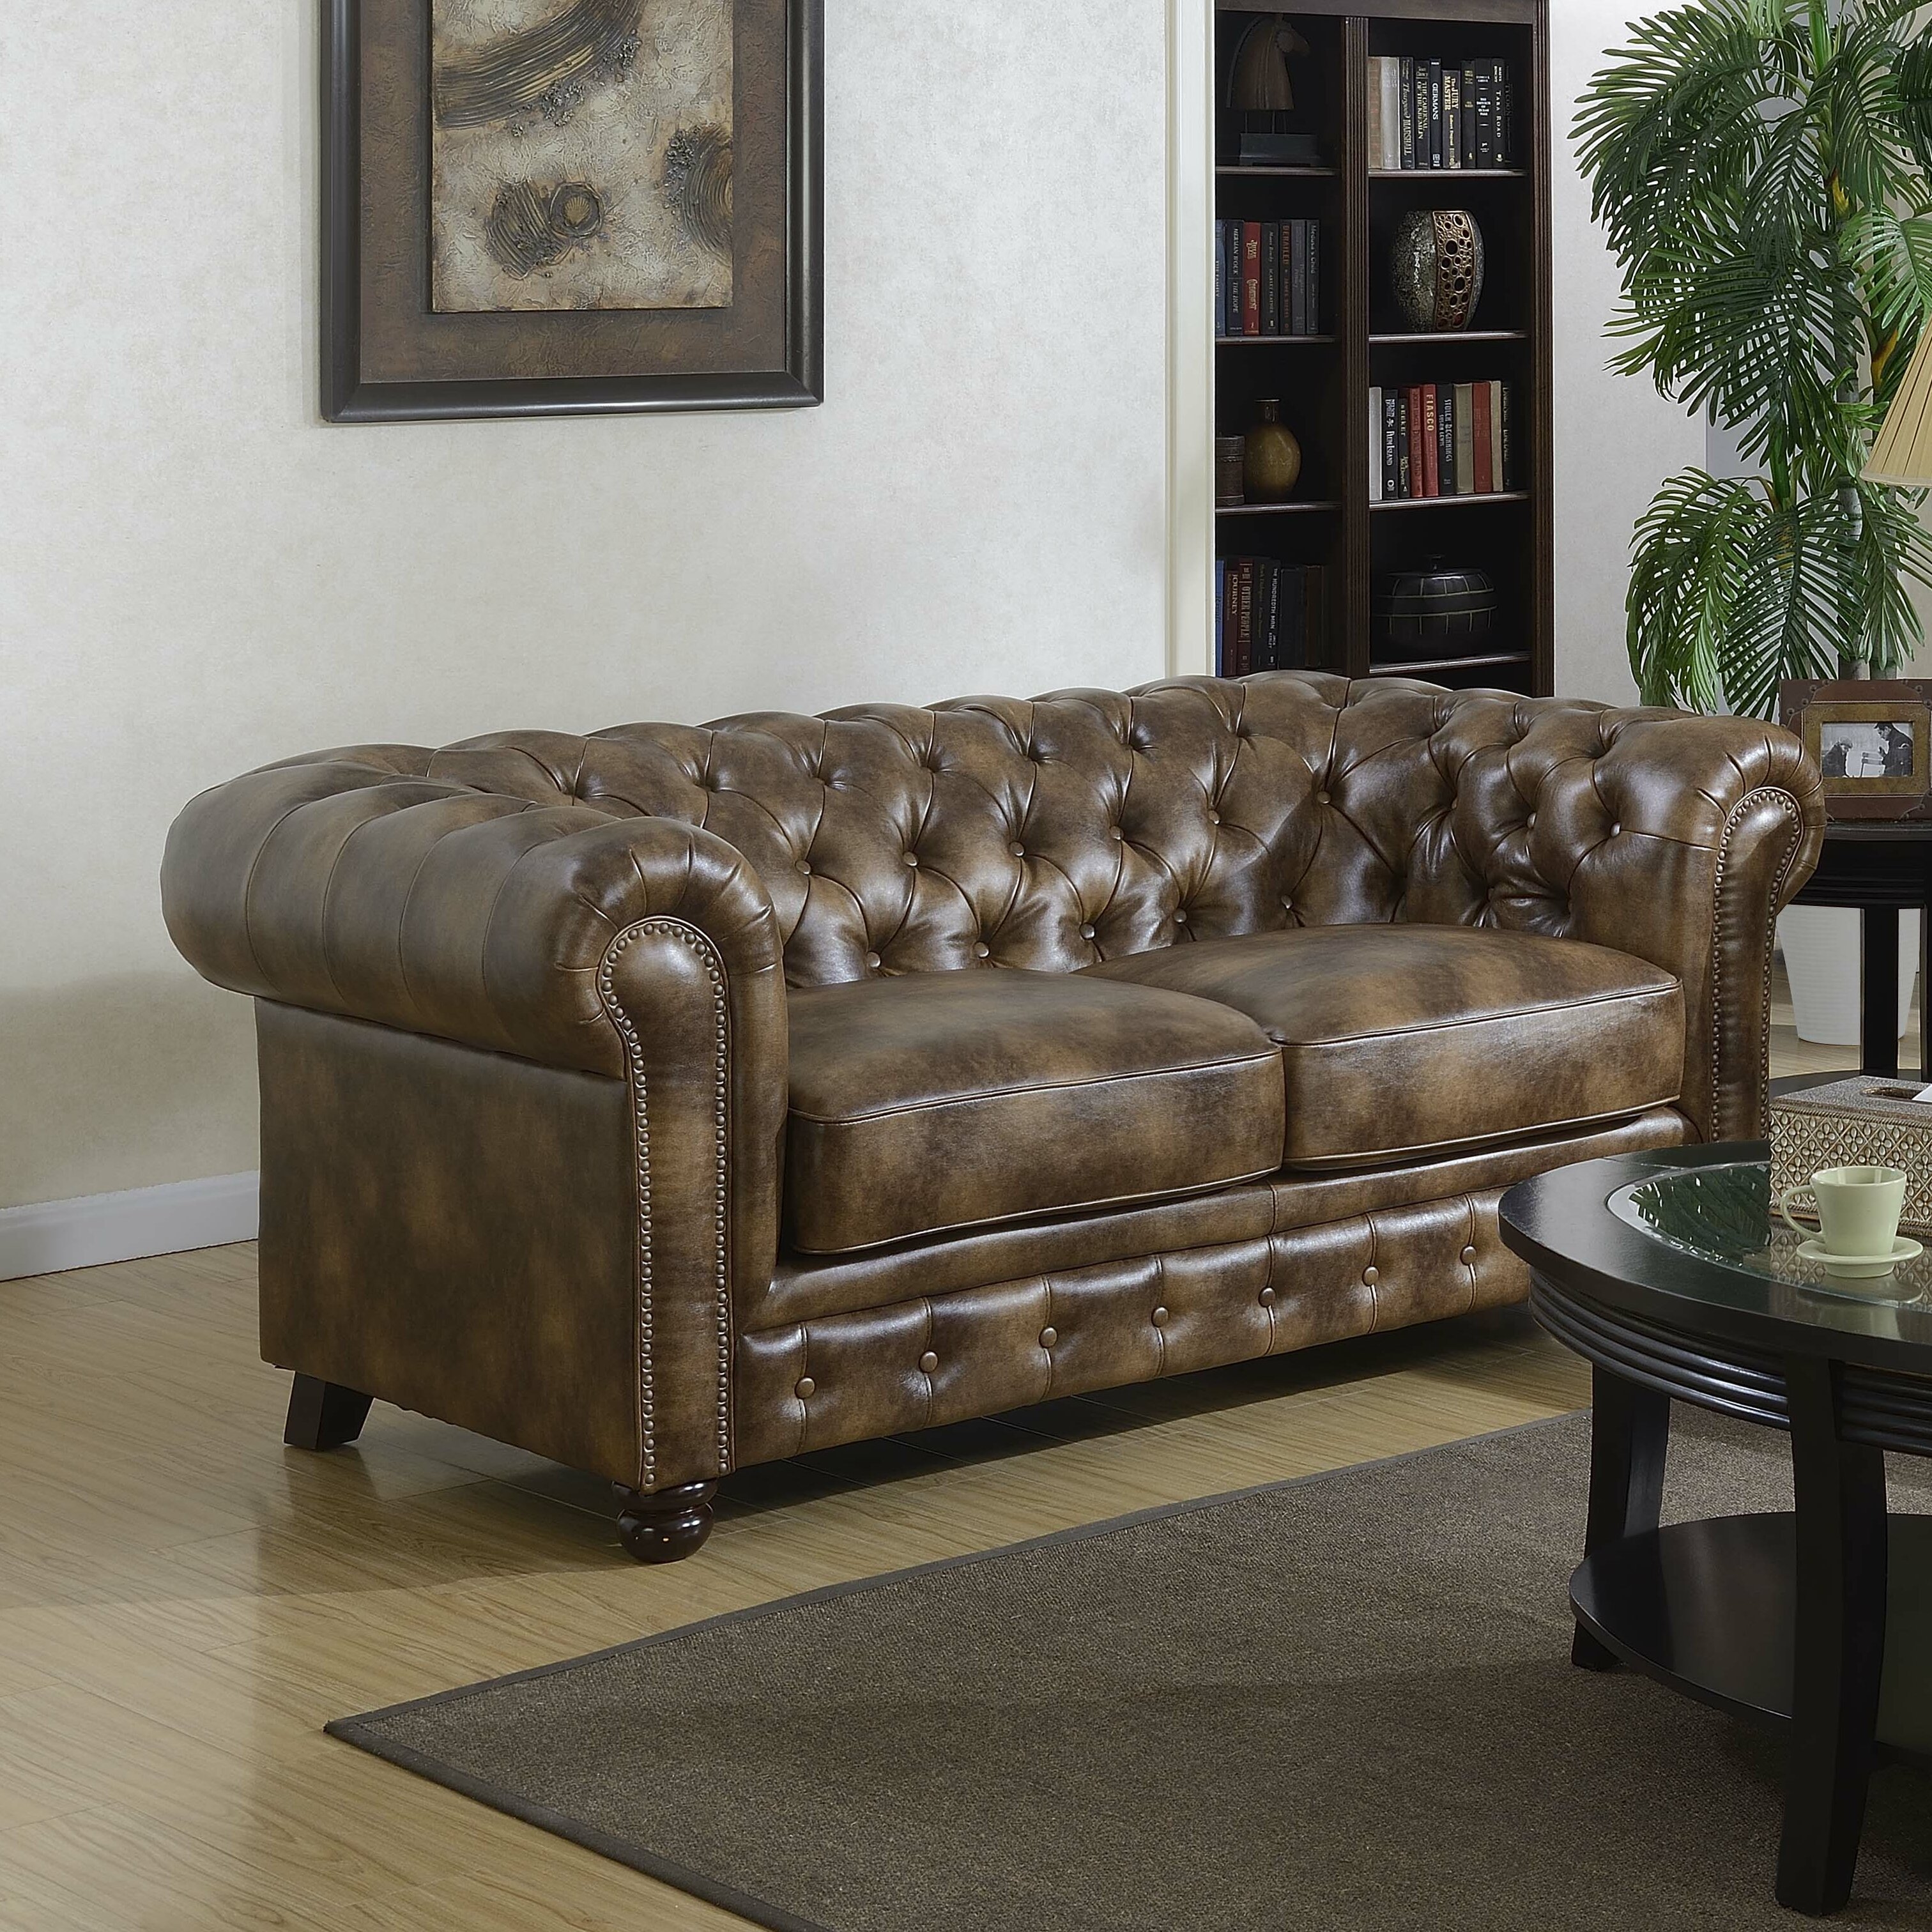 Traditional Chesterfield 3-Piece Sofa Loveseat Chair Living Room Faux Leather 